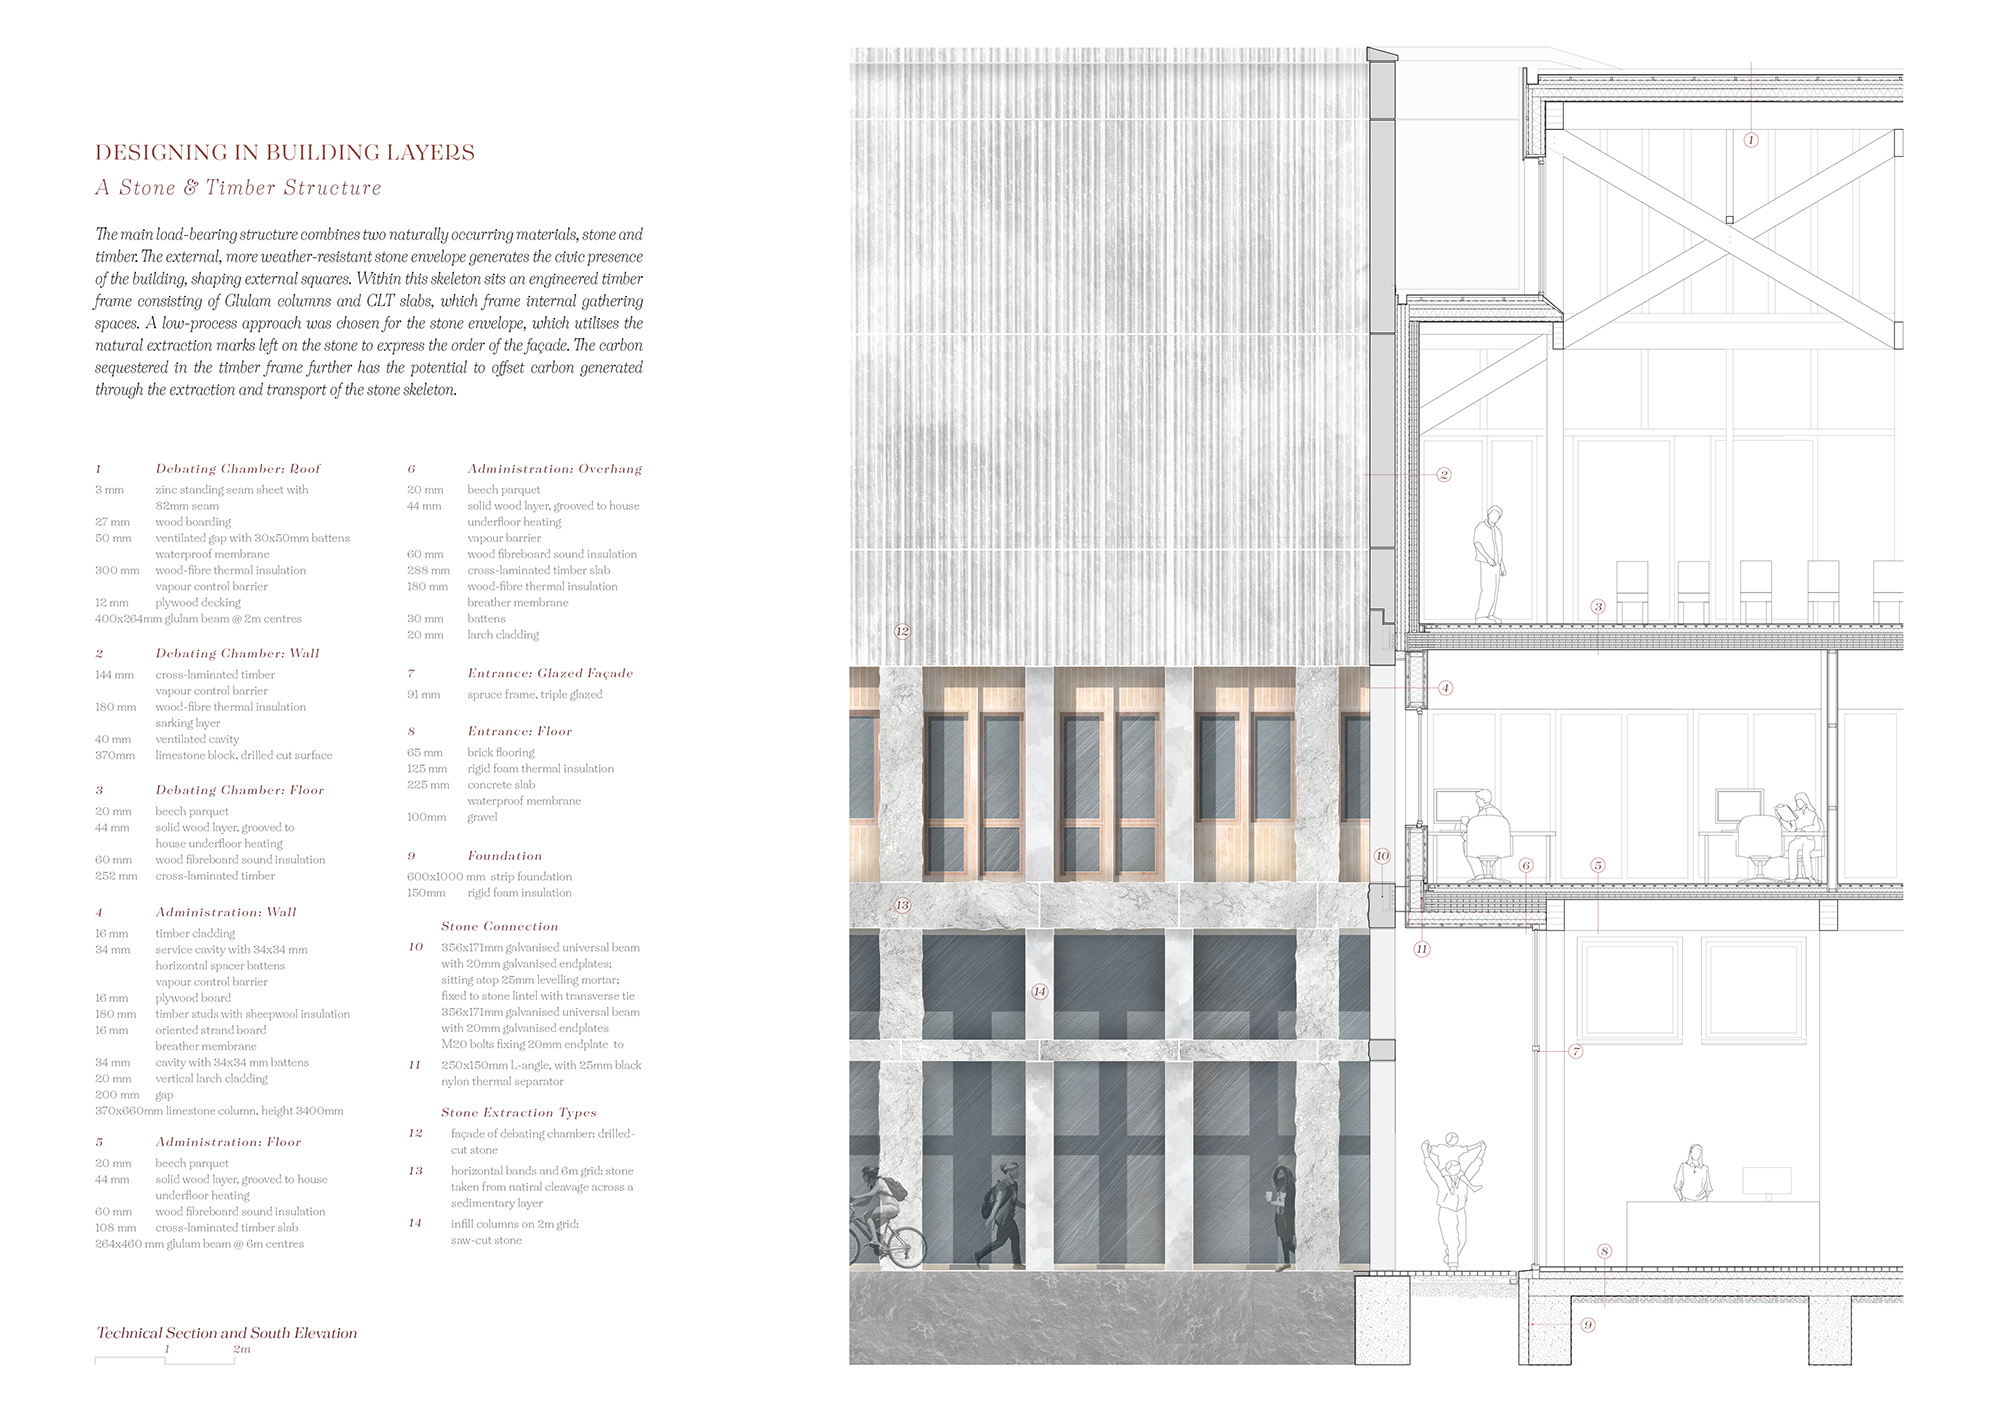 Page 4 of Inka Eismar winning entry to the A&DS and RIAS Scottish Student Awards. The board includes two technical illustrations (Section and south elevation) showcasing the building lauers using stone and timber.  